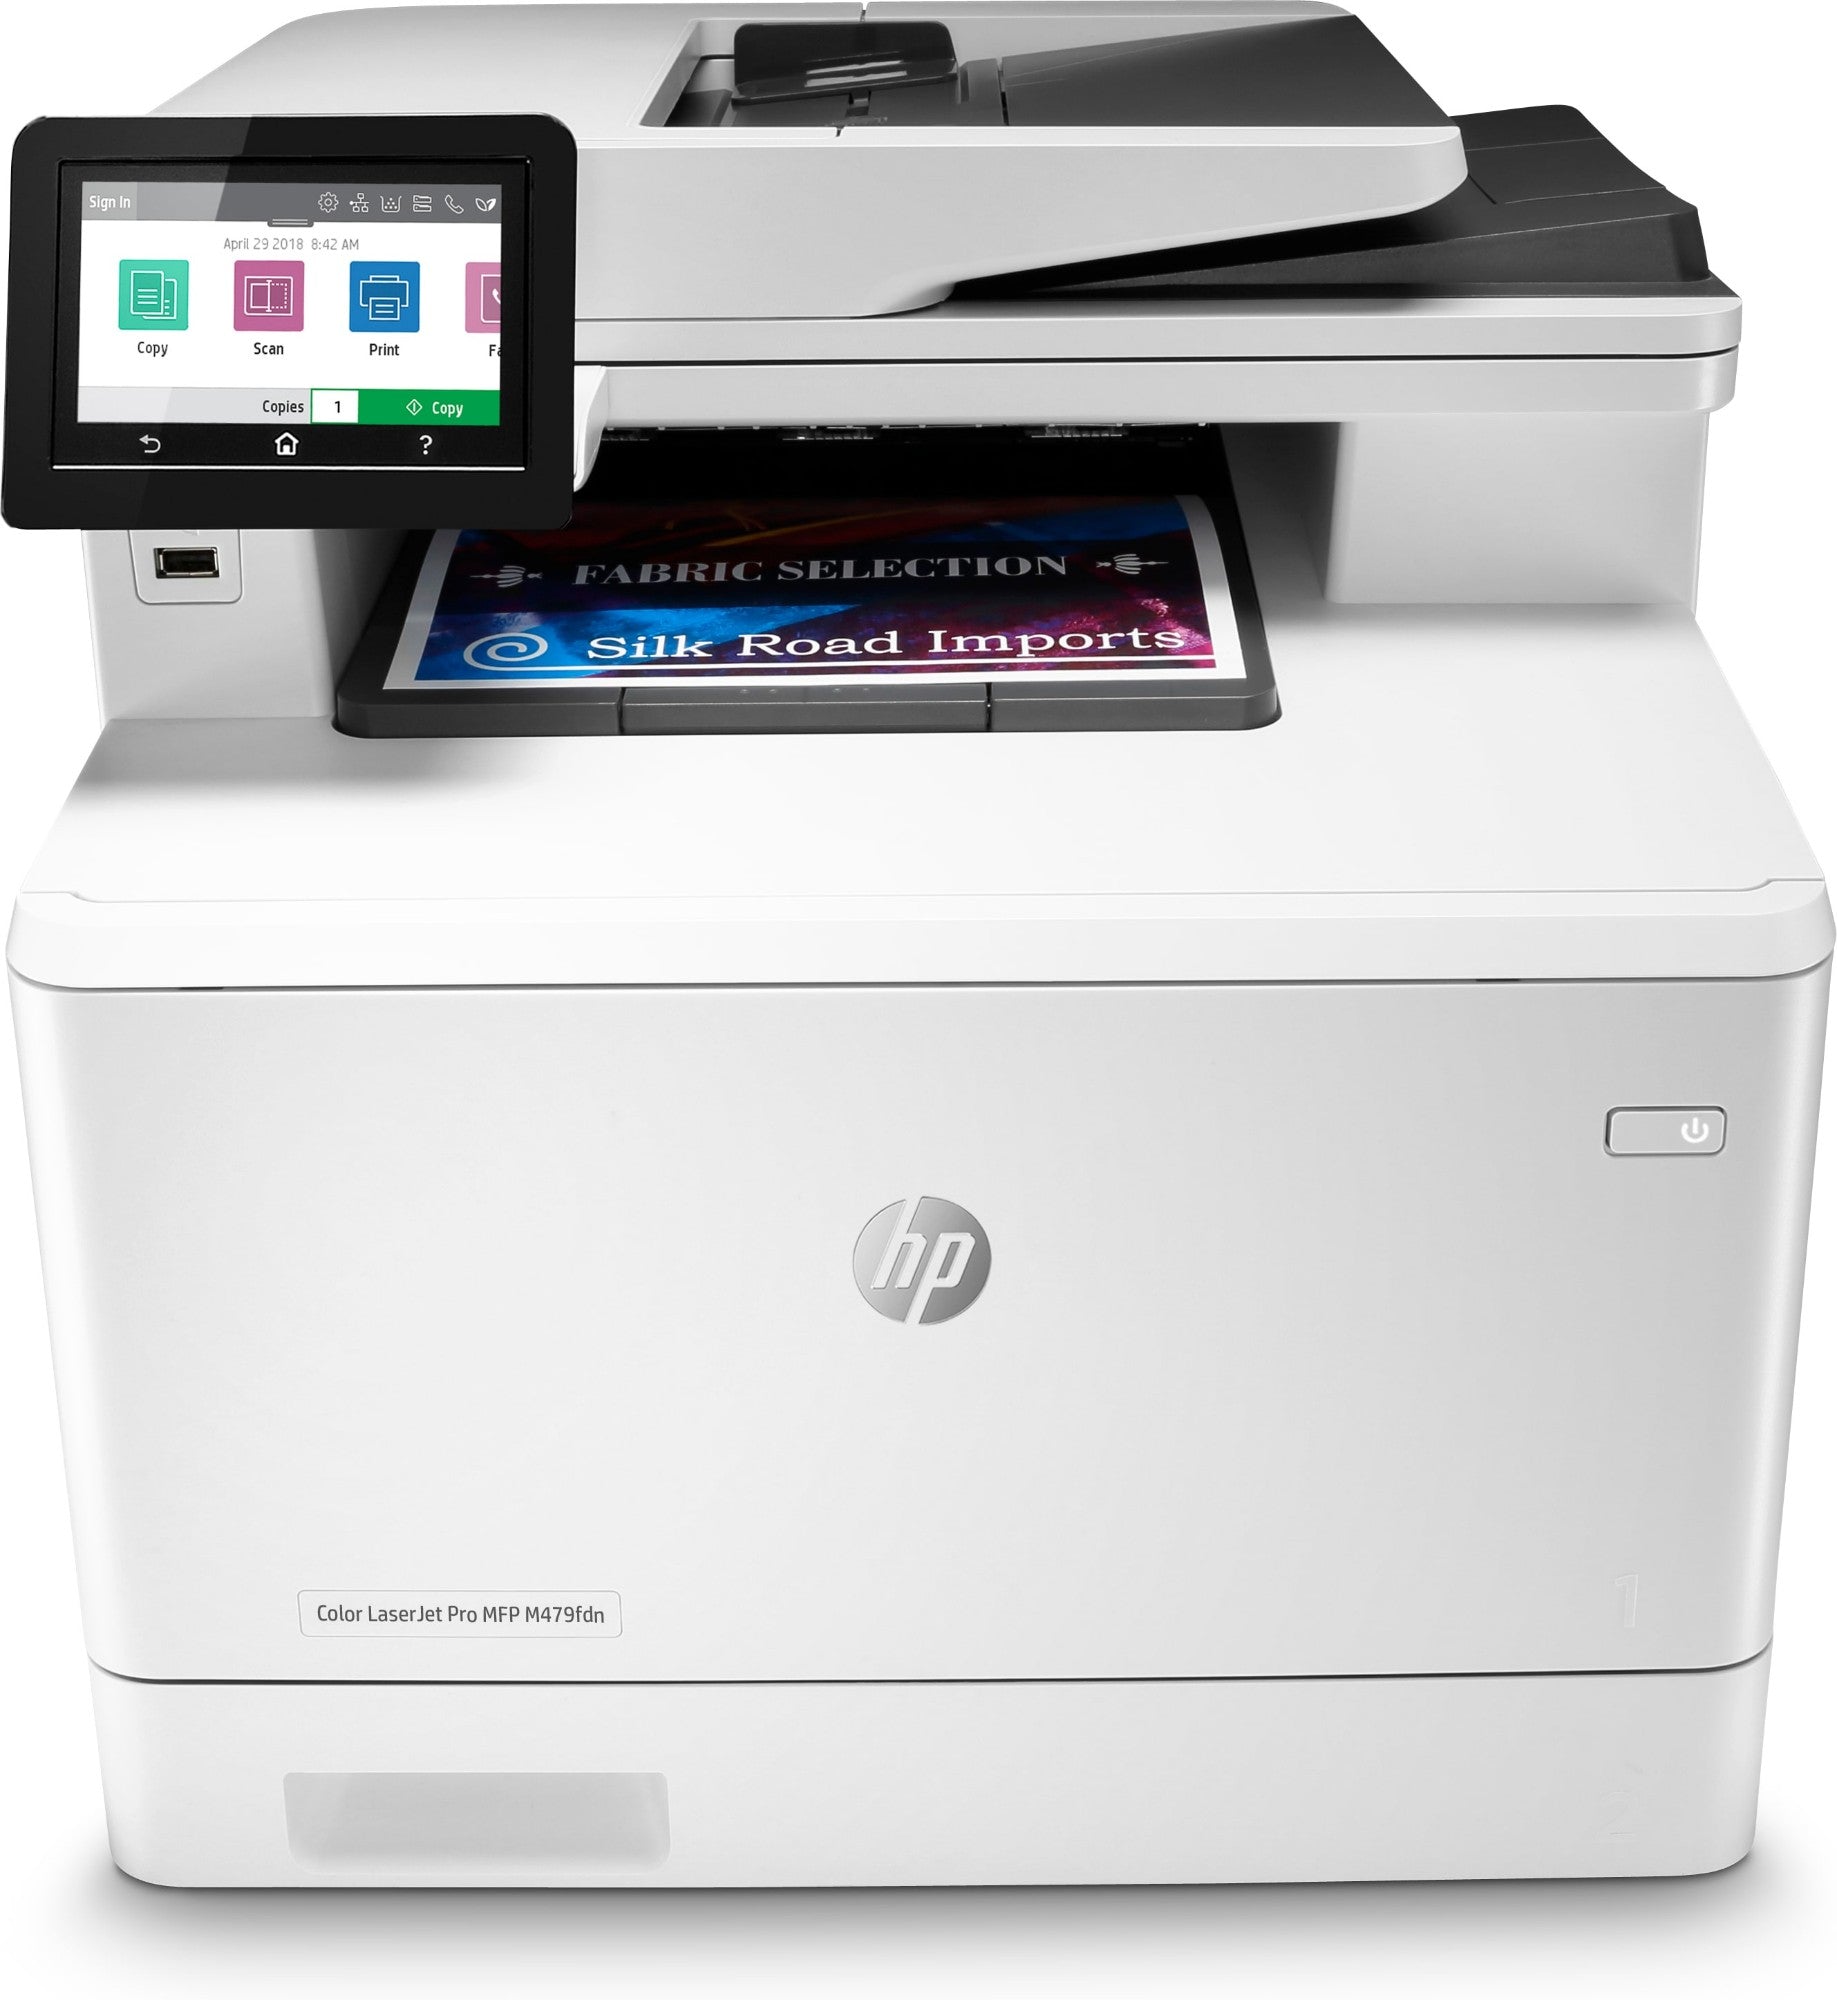 HP Color Laserjet Pro Mfp M479Fdn, Print, Copy, Scan, Fax, Email, Scan To Emailpdf; Two-Sided Printing; 50-Sheet Uncurled Adf-(W1A79A#B19)